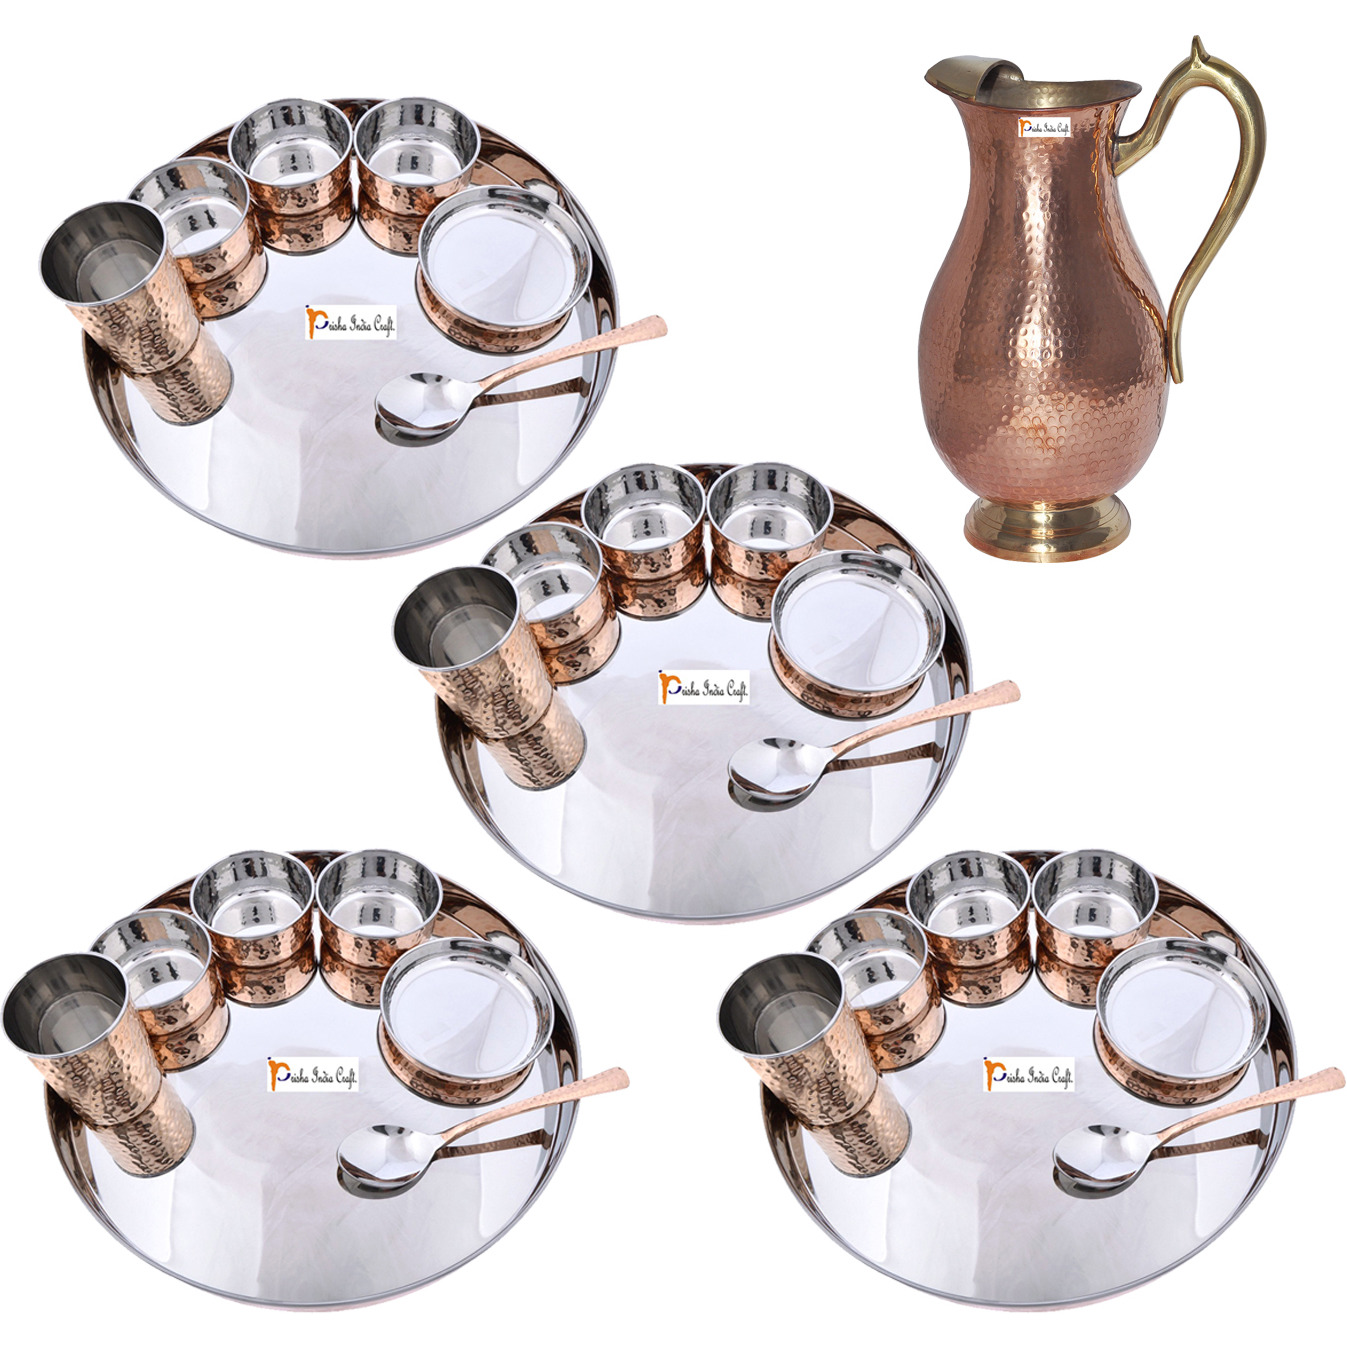 Prisha India Craft B. Set of 4 Dinnerware Traditional Stainless Steel Copper Dinner Set of Thali Plate, Bowls, Glass and Spoon, Dia 13  With 1 Pure Copper Mughal Pitcher Jug - Christmas Gift